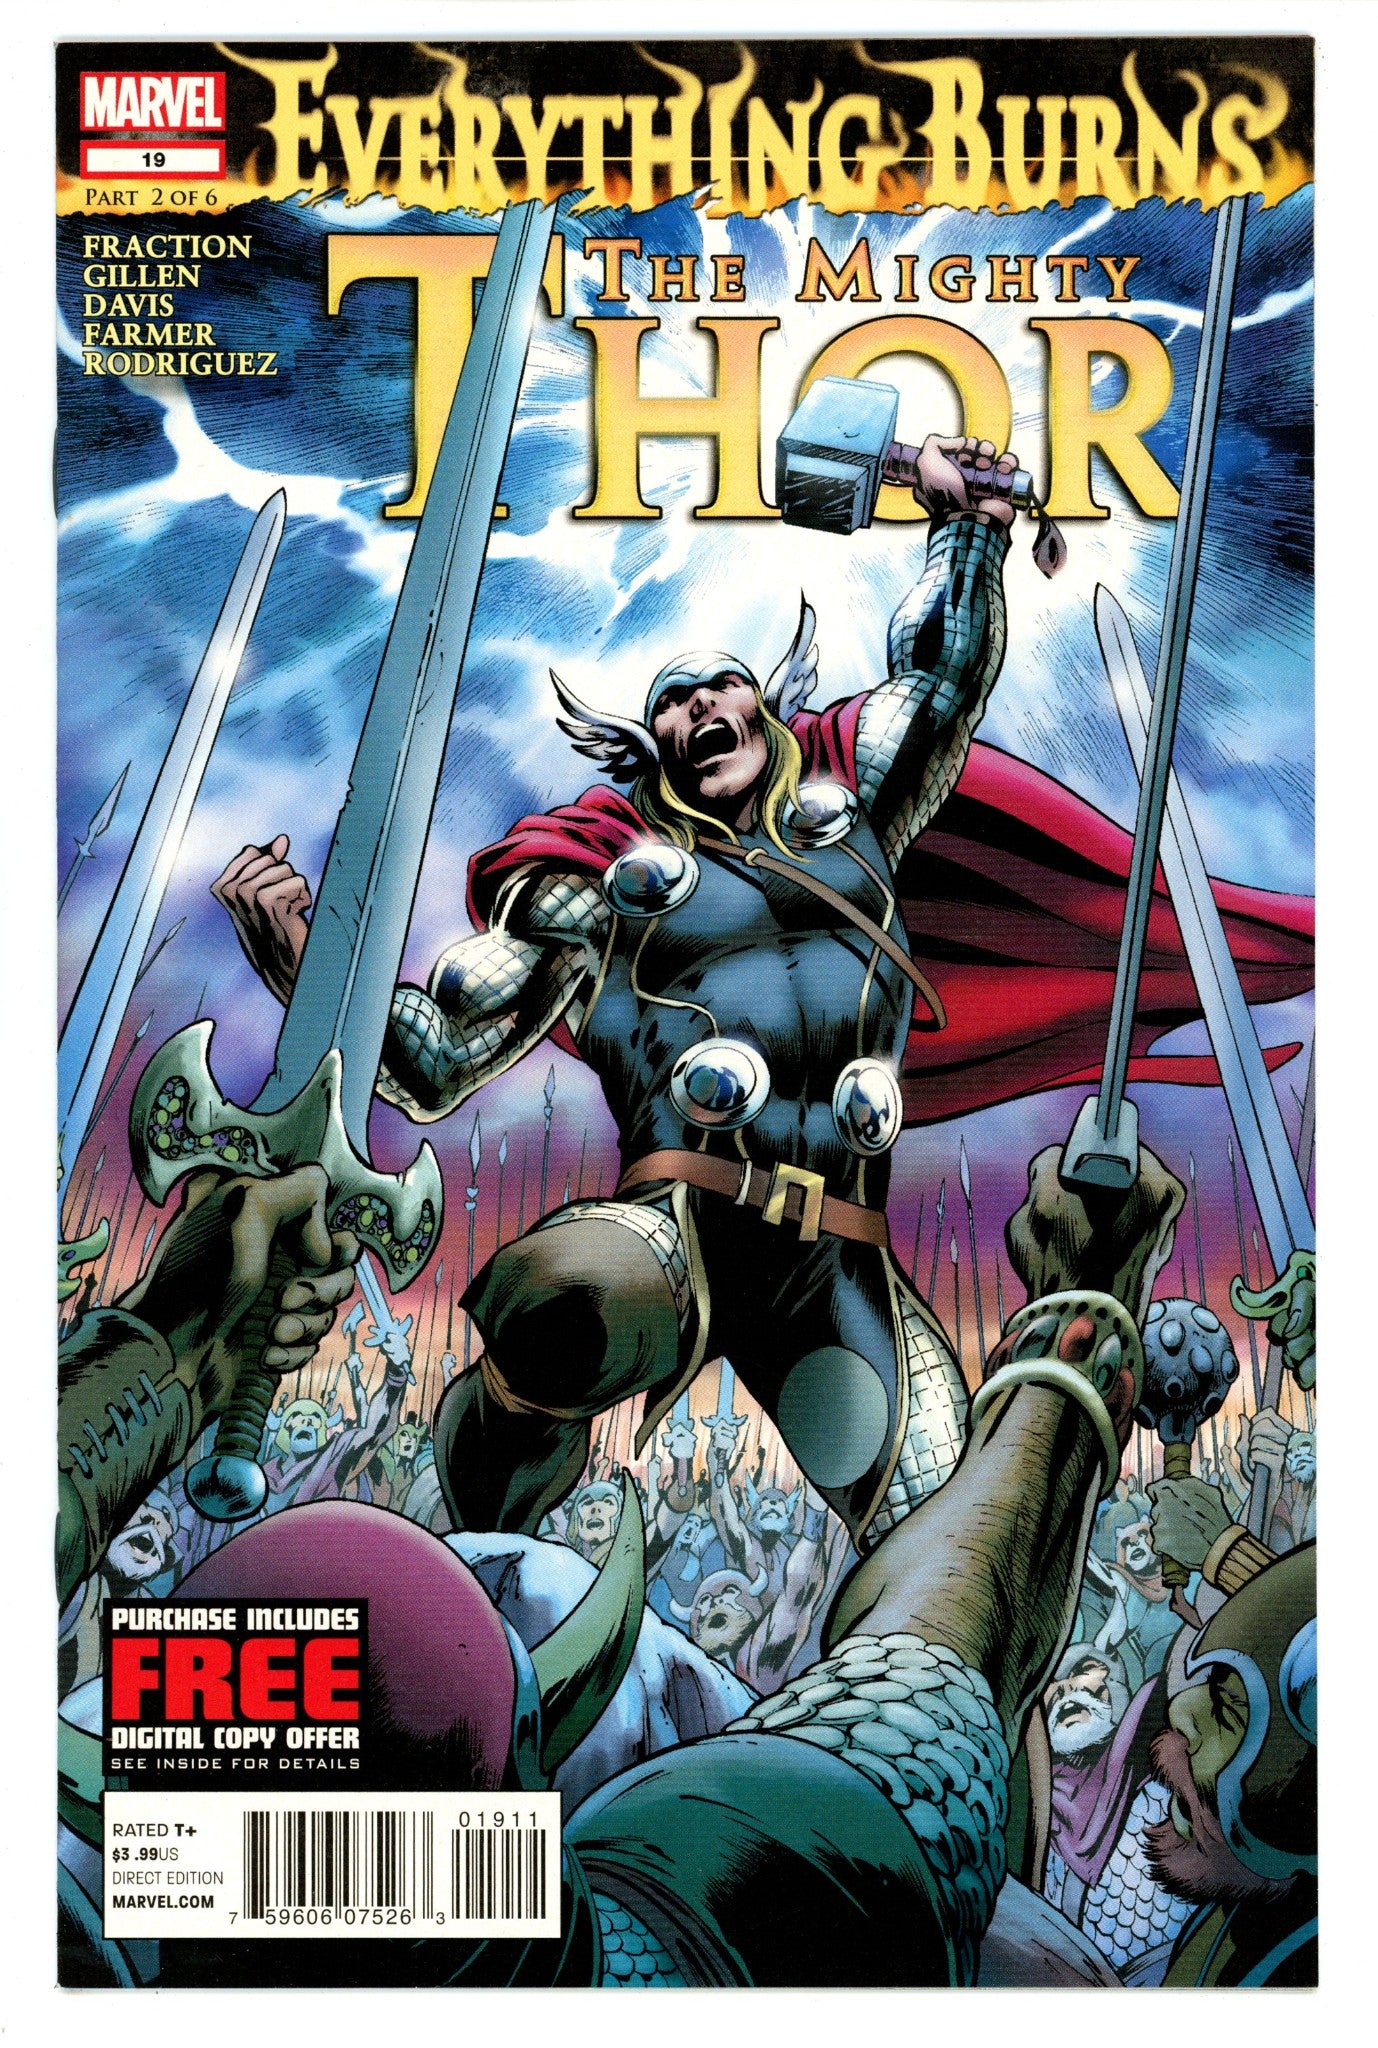 The Mighty Thor Vol 1 19 High Grade (2012) 